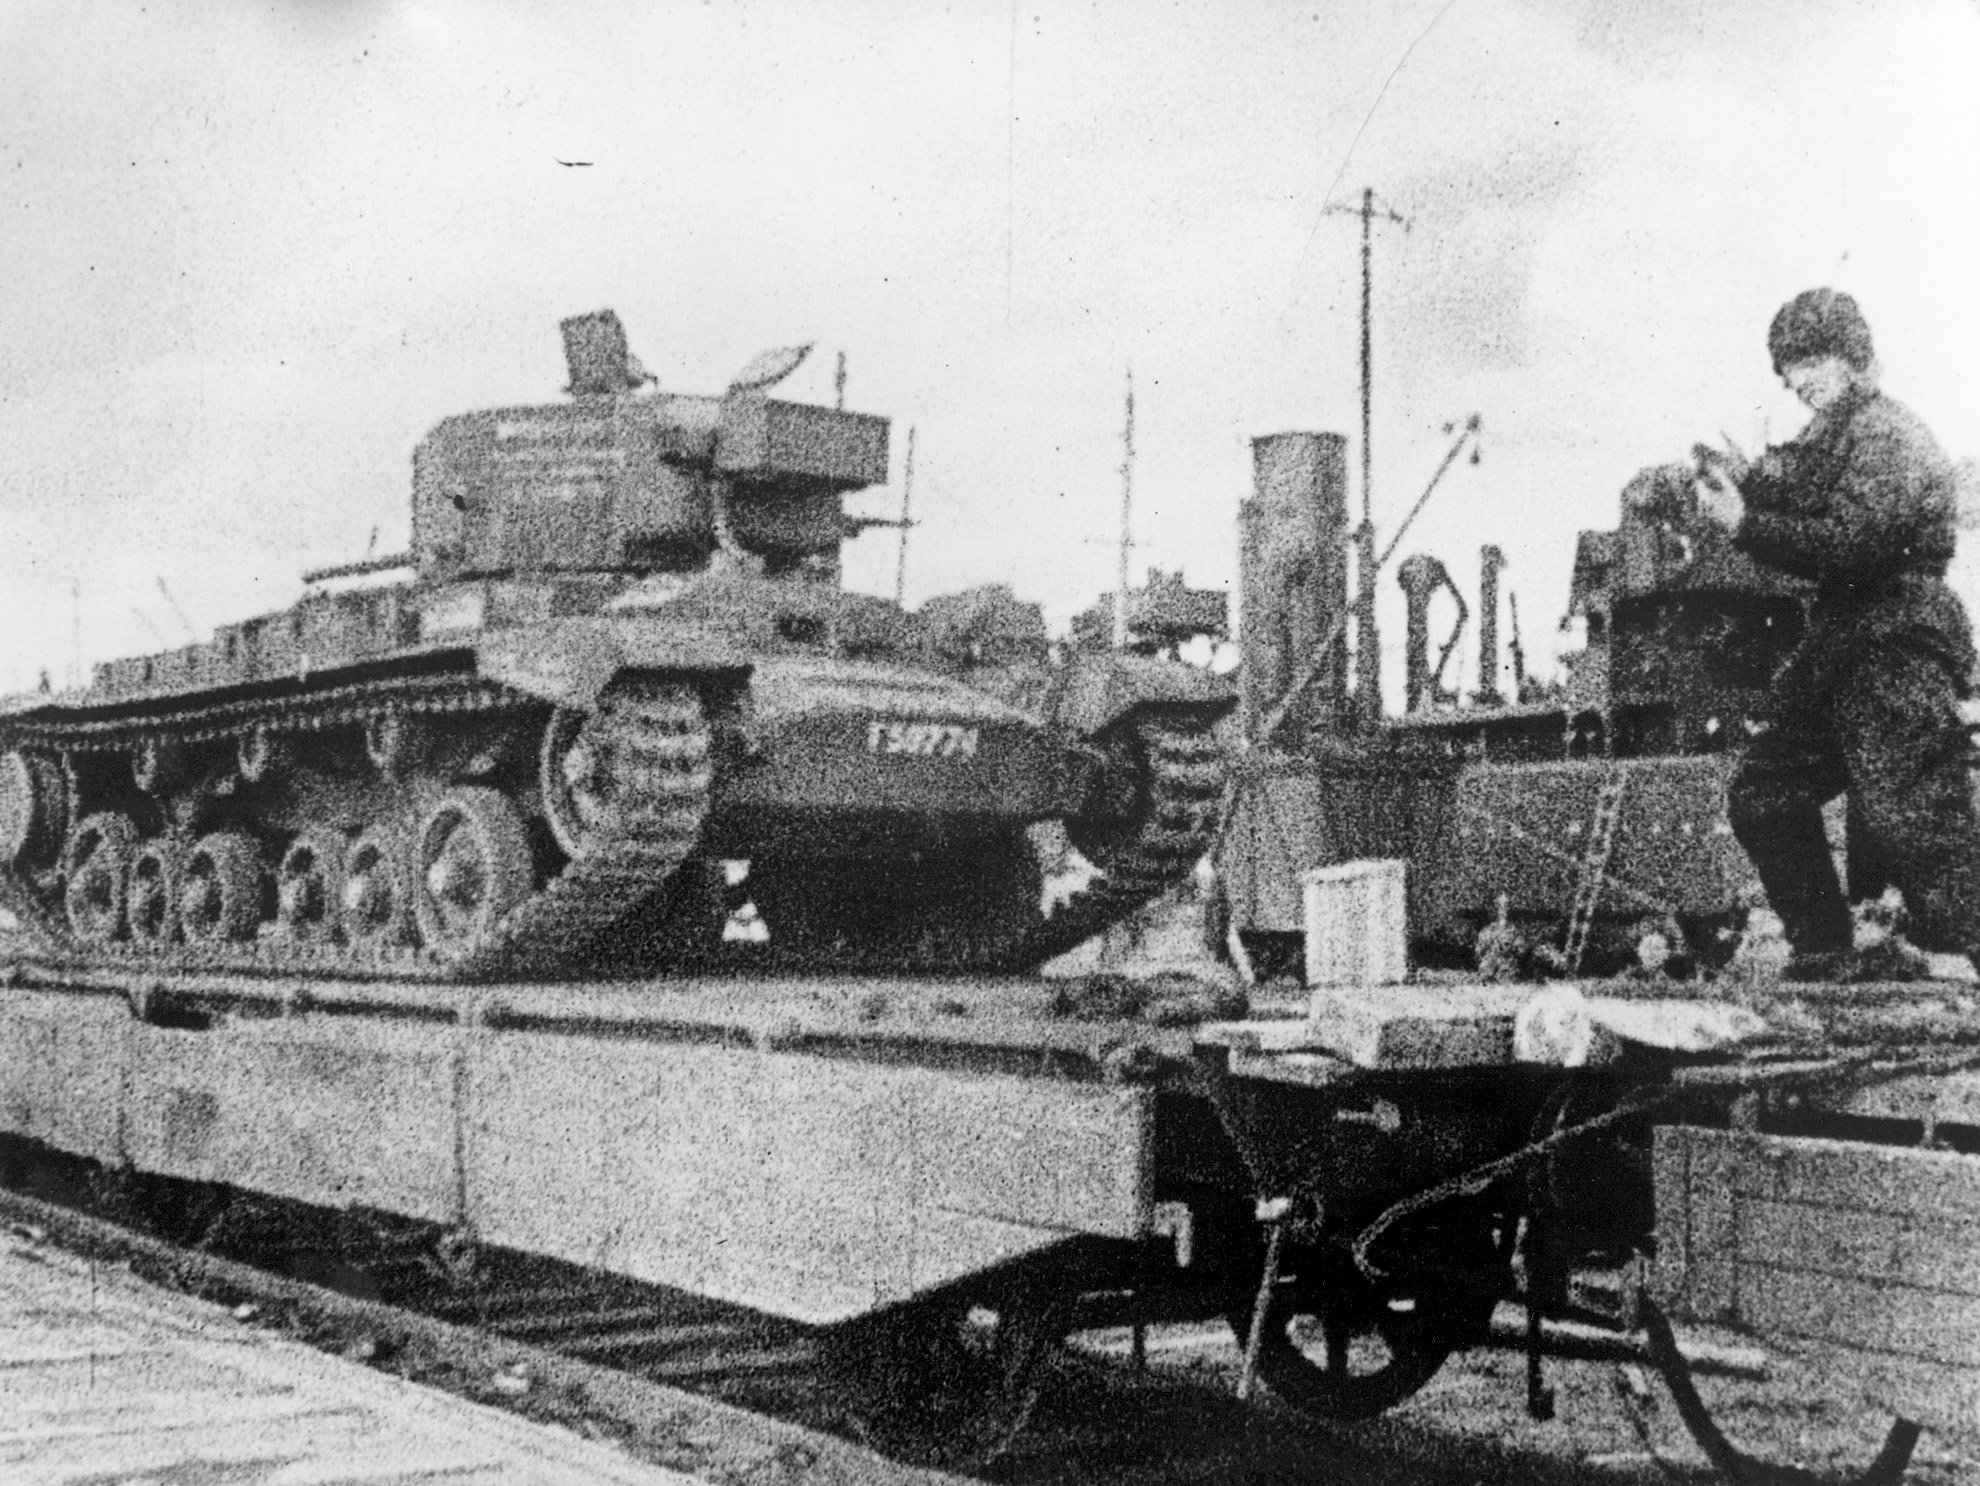 A Lend-Lease tank is delivered to the Red Army in late 1942. The program, which supplied staggering amounts of war materiel to the Soviets via the ports of Murmansk and Archangel, kept the beleaguered Stalinist forces fighting.